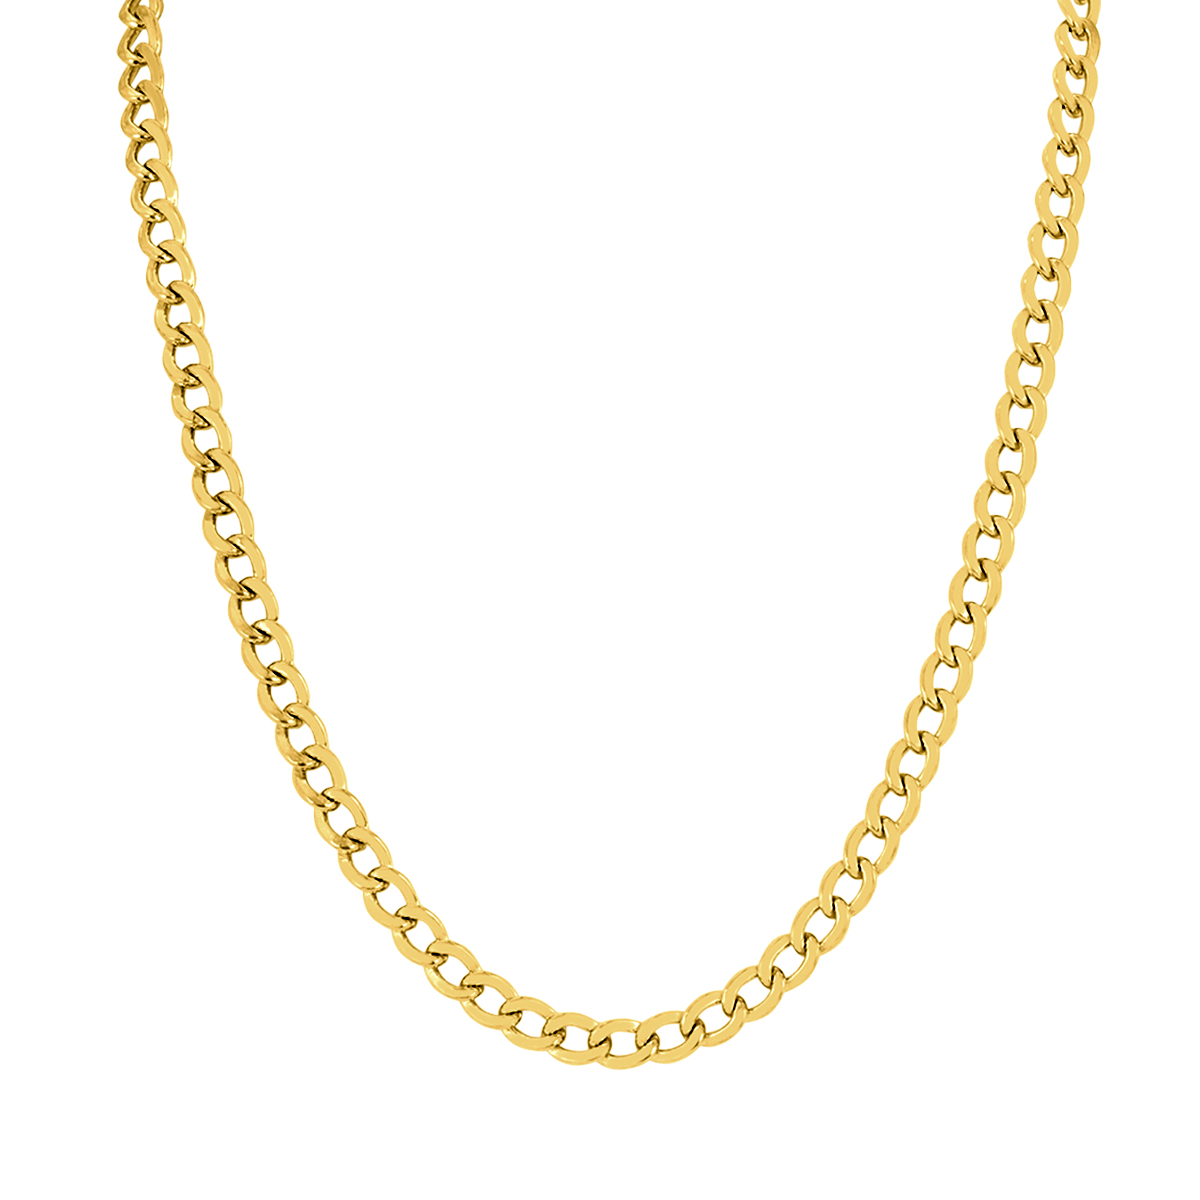 szul.com 14K Yellow Gold Filled 5.8MM Curb Link Chain with Lobster Clasp - 22 Inch